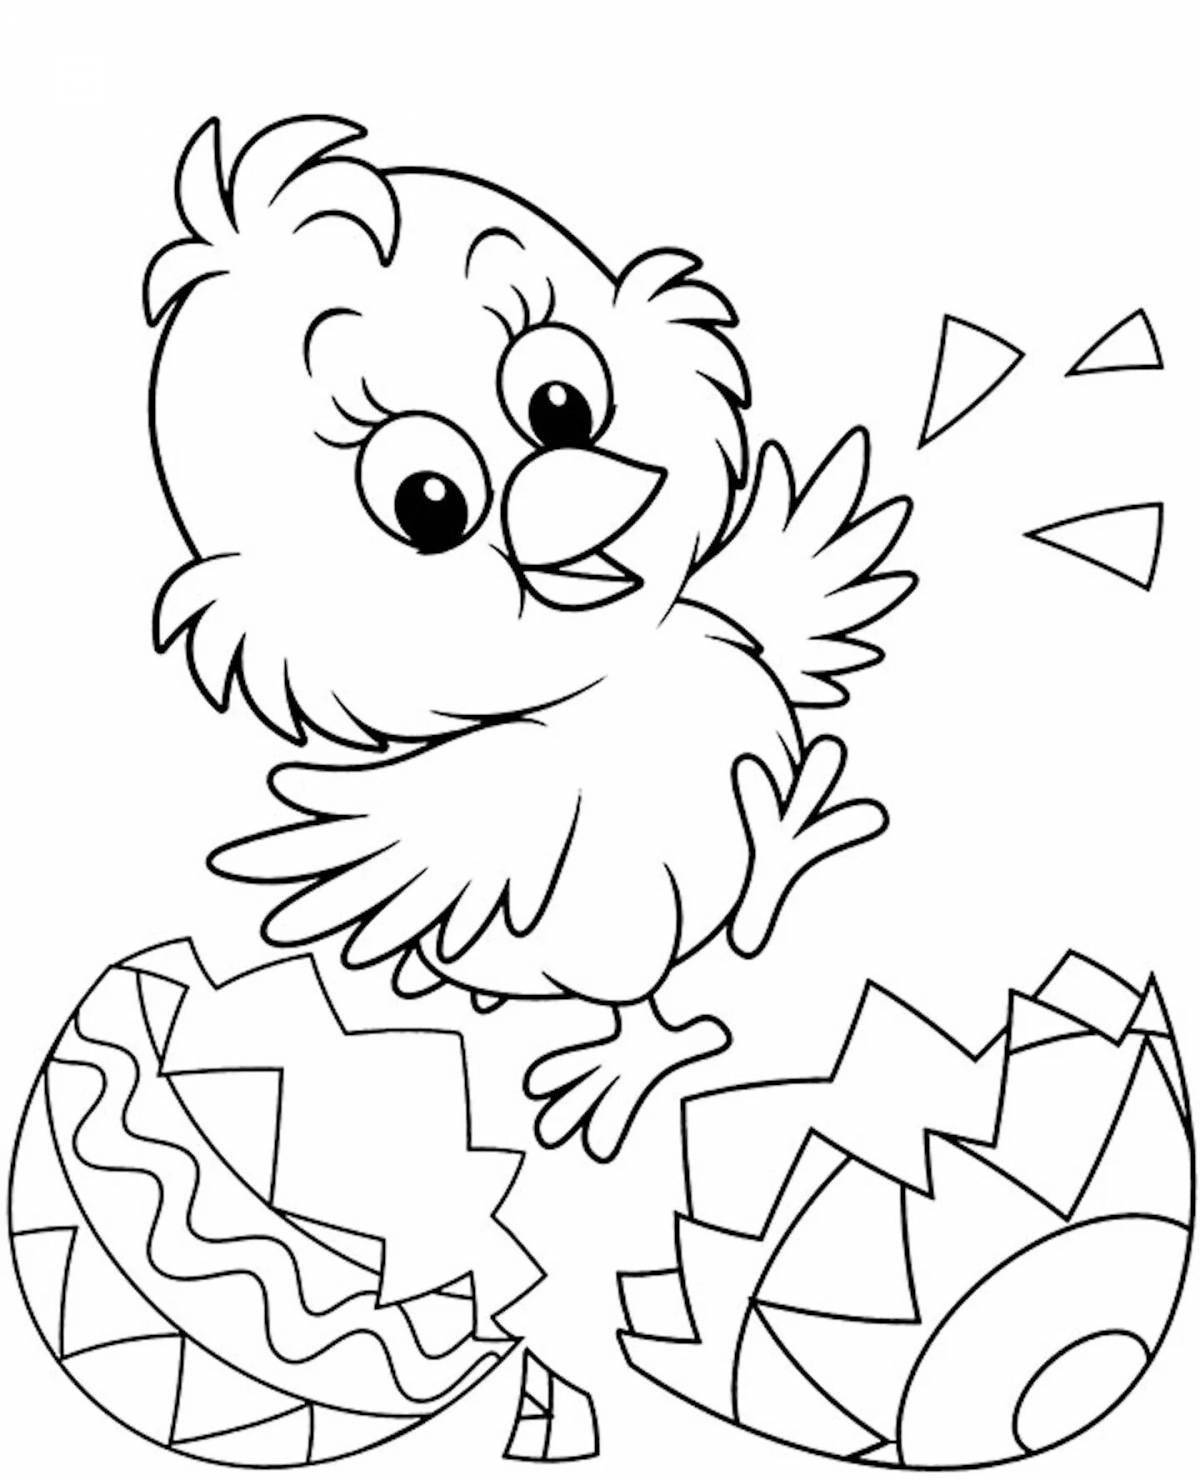 Cute chicks coloring book for 6-7 year olds